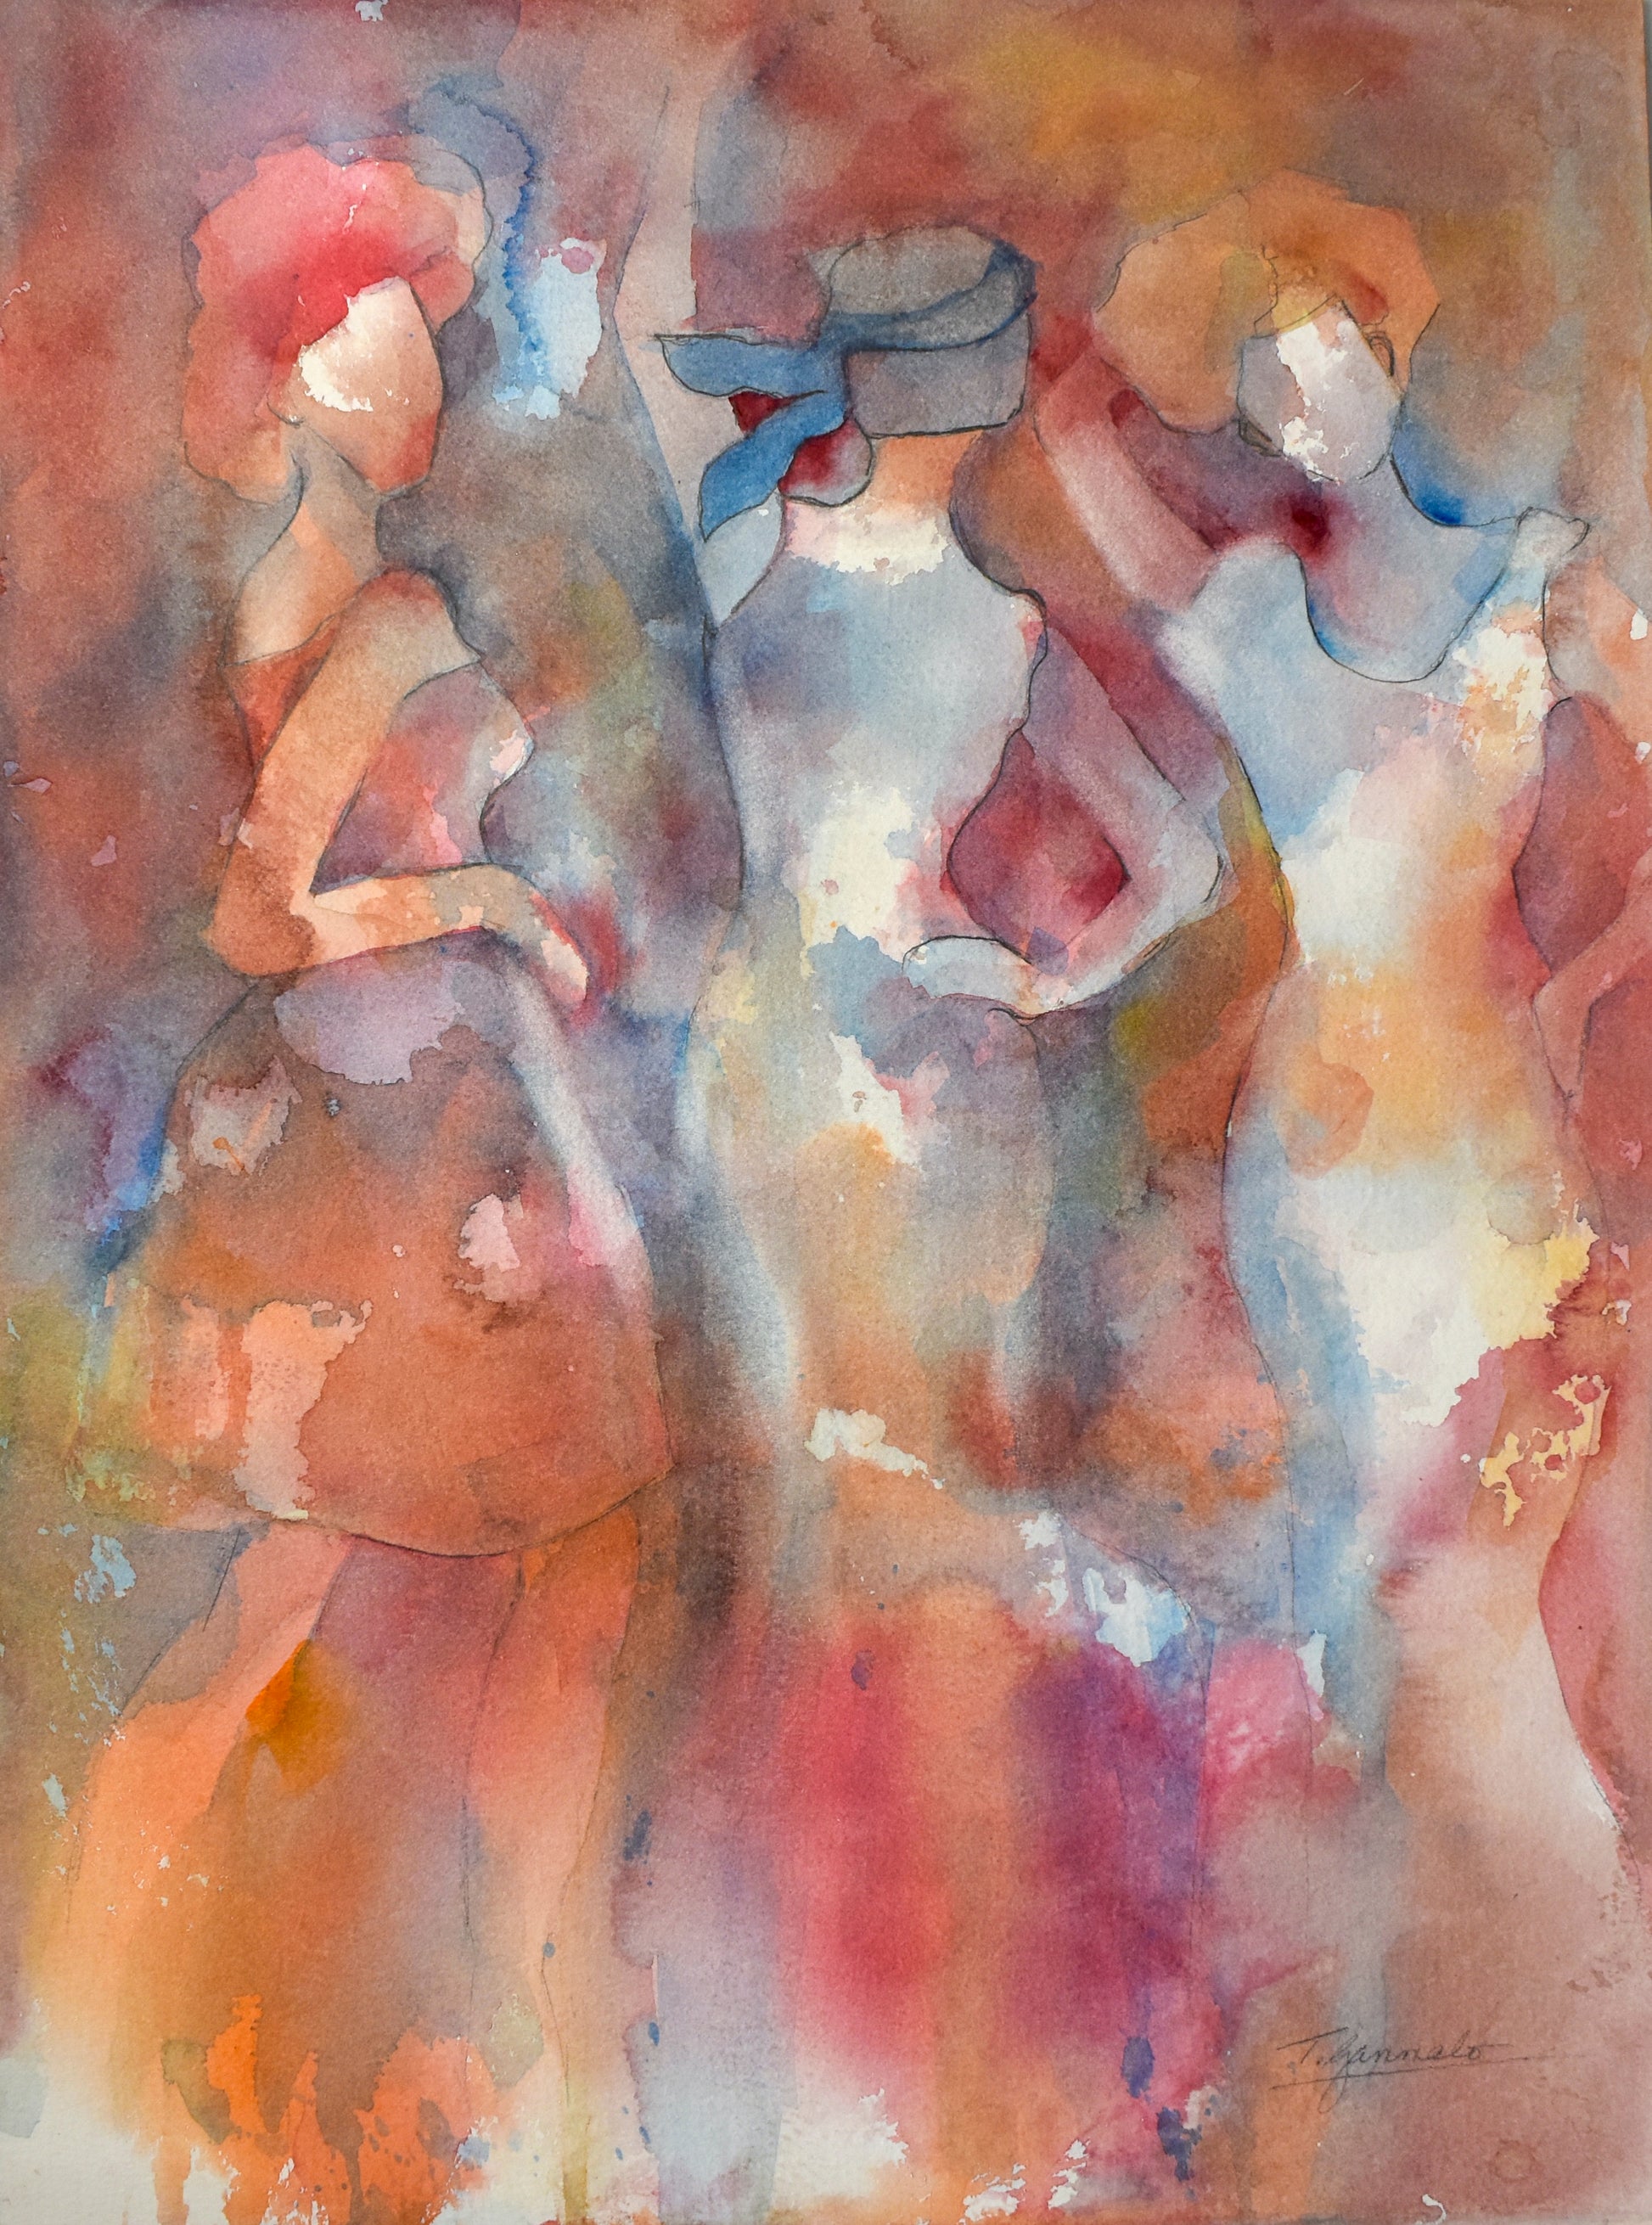 Watercolor painting in soft hues of orange, blues, white and red featuring three women in movement; artist Teri Gammalo; 11"Wx15"H